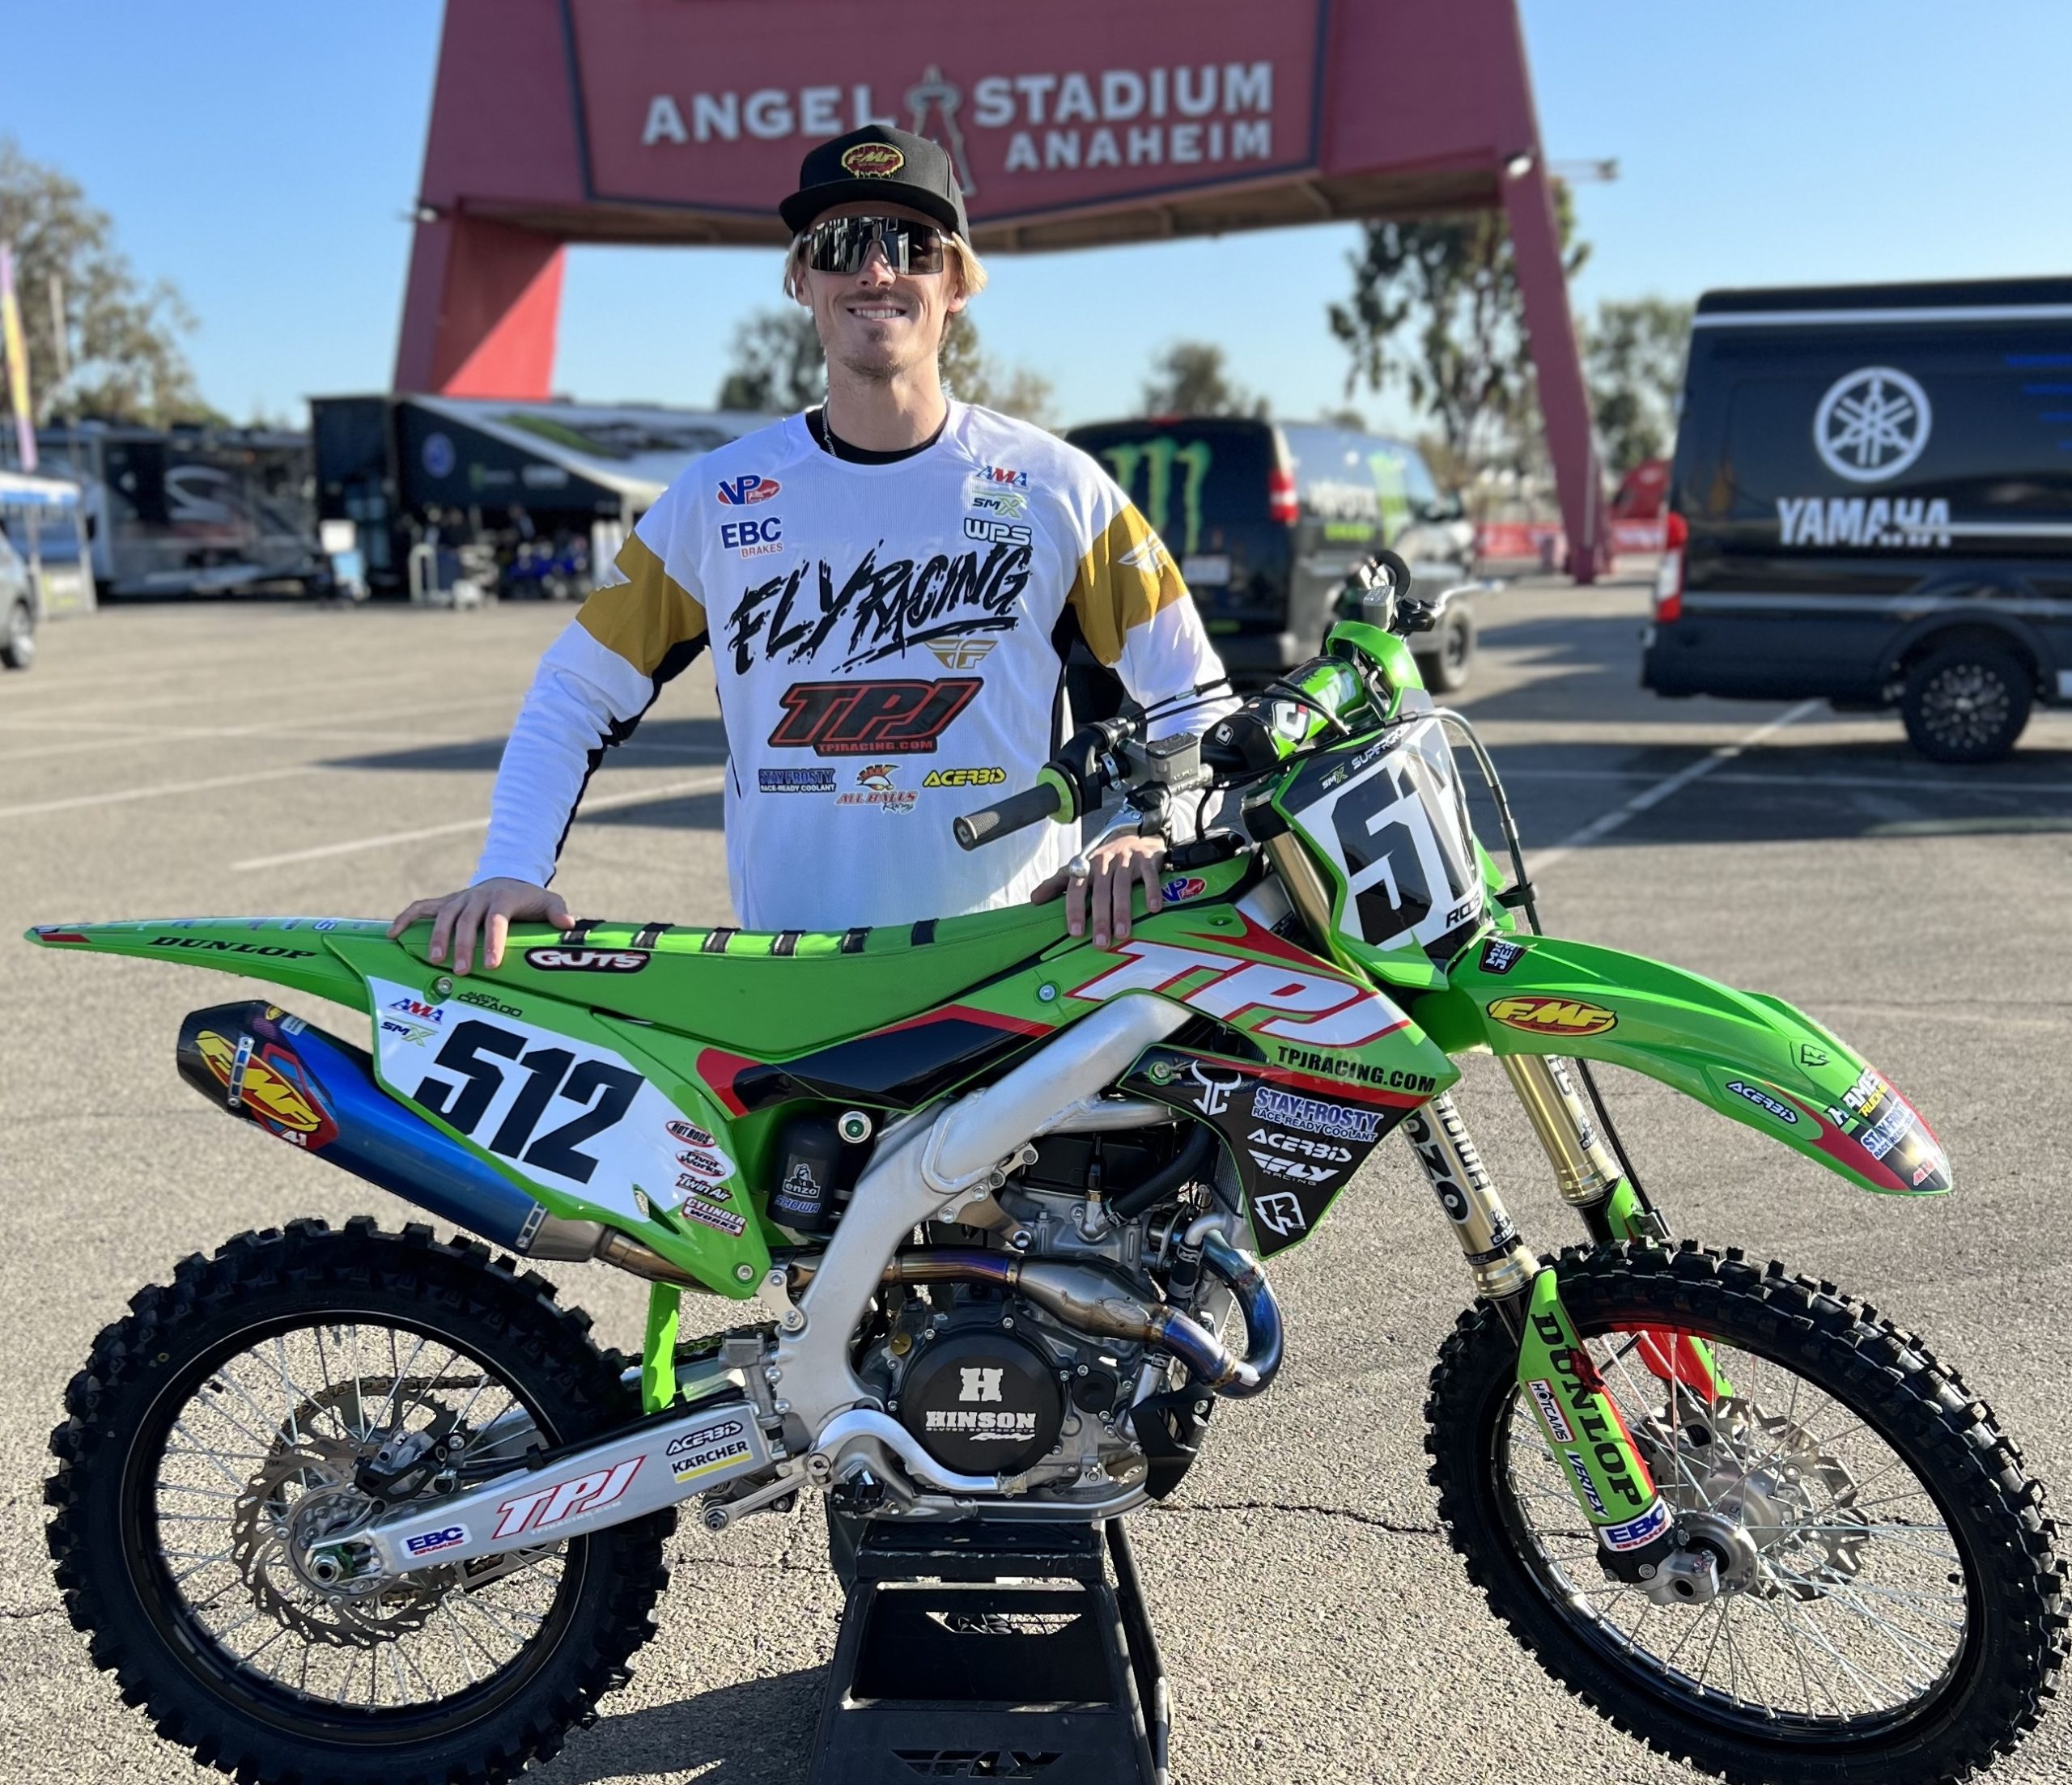 Attalla’s Austin Cozadd returns to Birmingham to compete in Monster Energy AMA Supercross